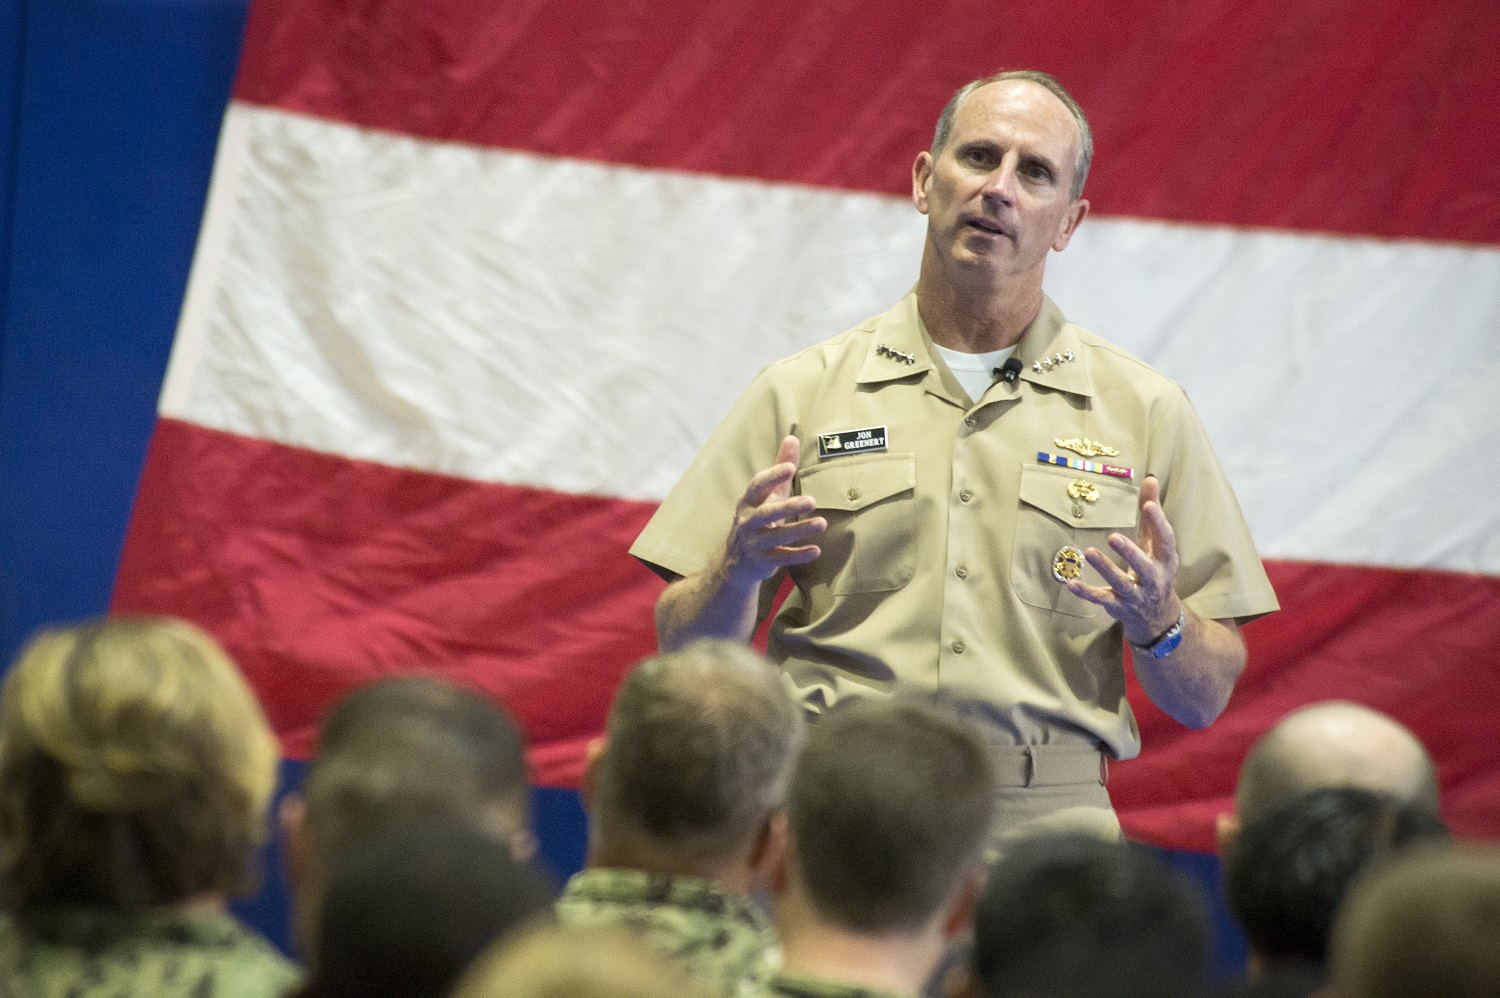 MANAMA, Bahrain (July 13, 2015) Chief of Naval Operations (CNO) Adm. Jonathan Greenert holds an all-hands call with service members, civilians and their families at Naval Support Activity (NSA) Bahrain. Greenert discussed the current status of the Navy and presented U.S. Naval Forces Central Command (NAVCENT) with the Navy Unit Commendation (NUC) for meritorious service in the performance of assigned missions from June 2010 to June 2015. U.S. Navy photo by Mass Communication Specialist 1st Class Nathan Laird.